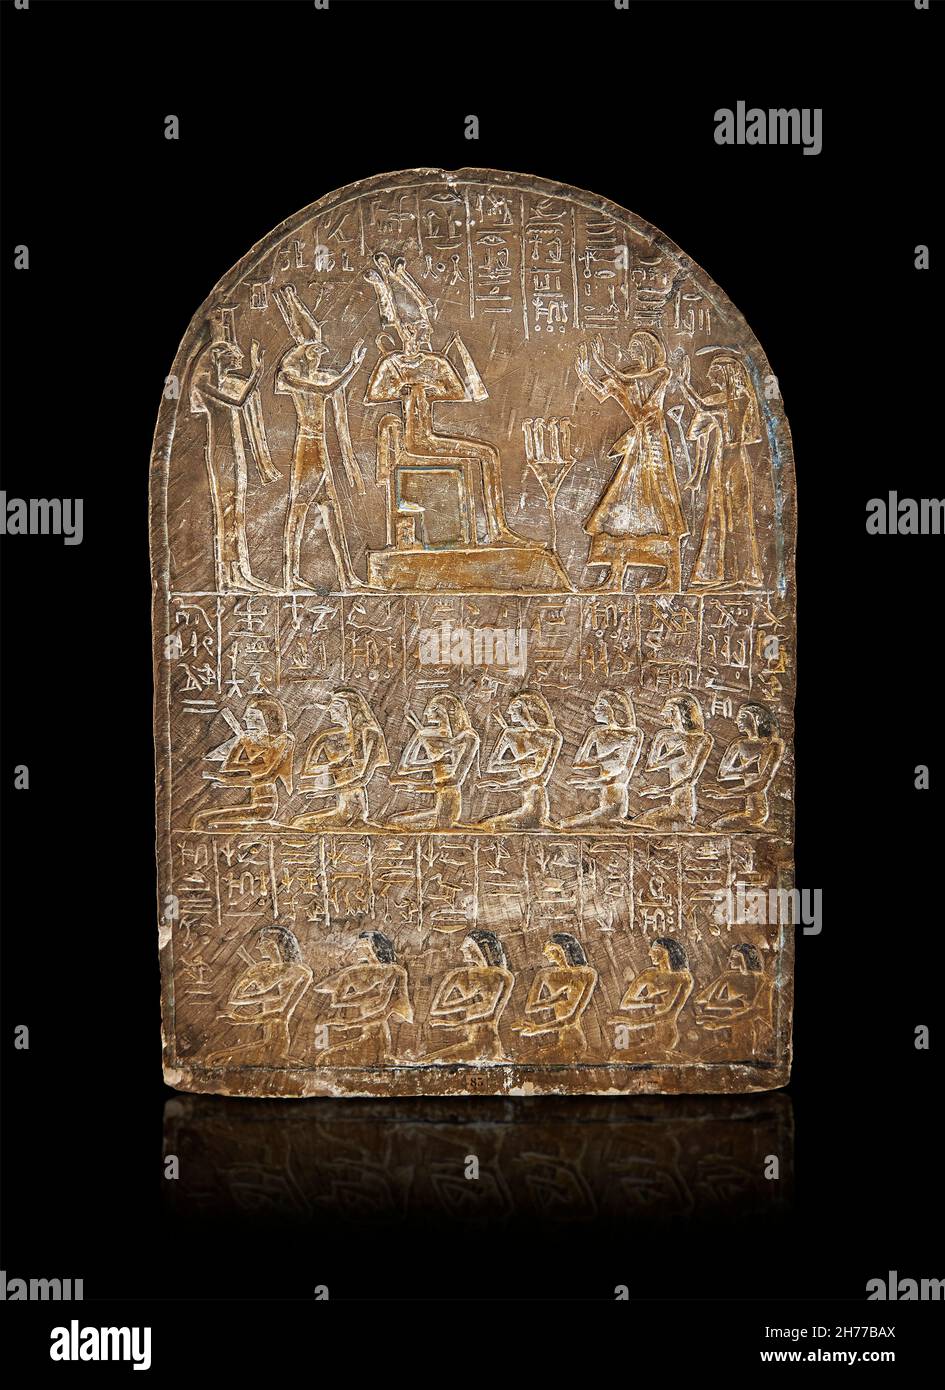 Ancient Egyptian stele of Nefer-Ptah, 1307-1196 BC, 19th Dtnasty, Abydos. Museum of Fina Arts Lyon inv H1381. Stele consecrated to the Adybenian gods Stock Photo